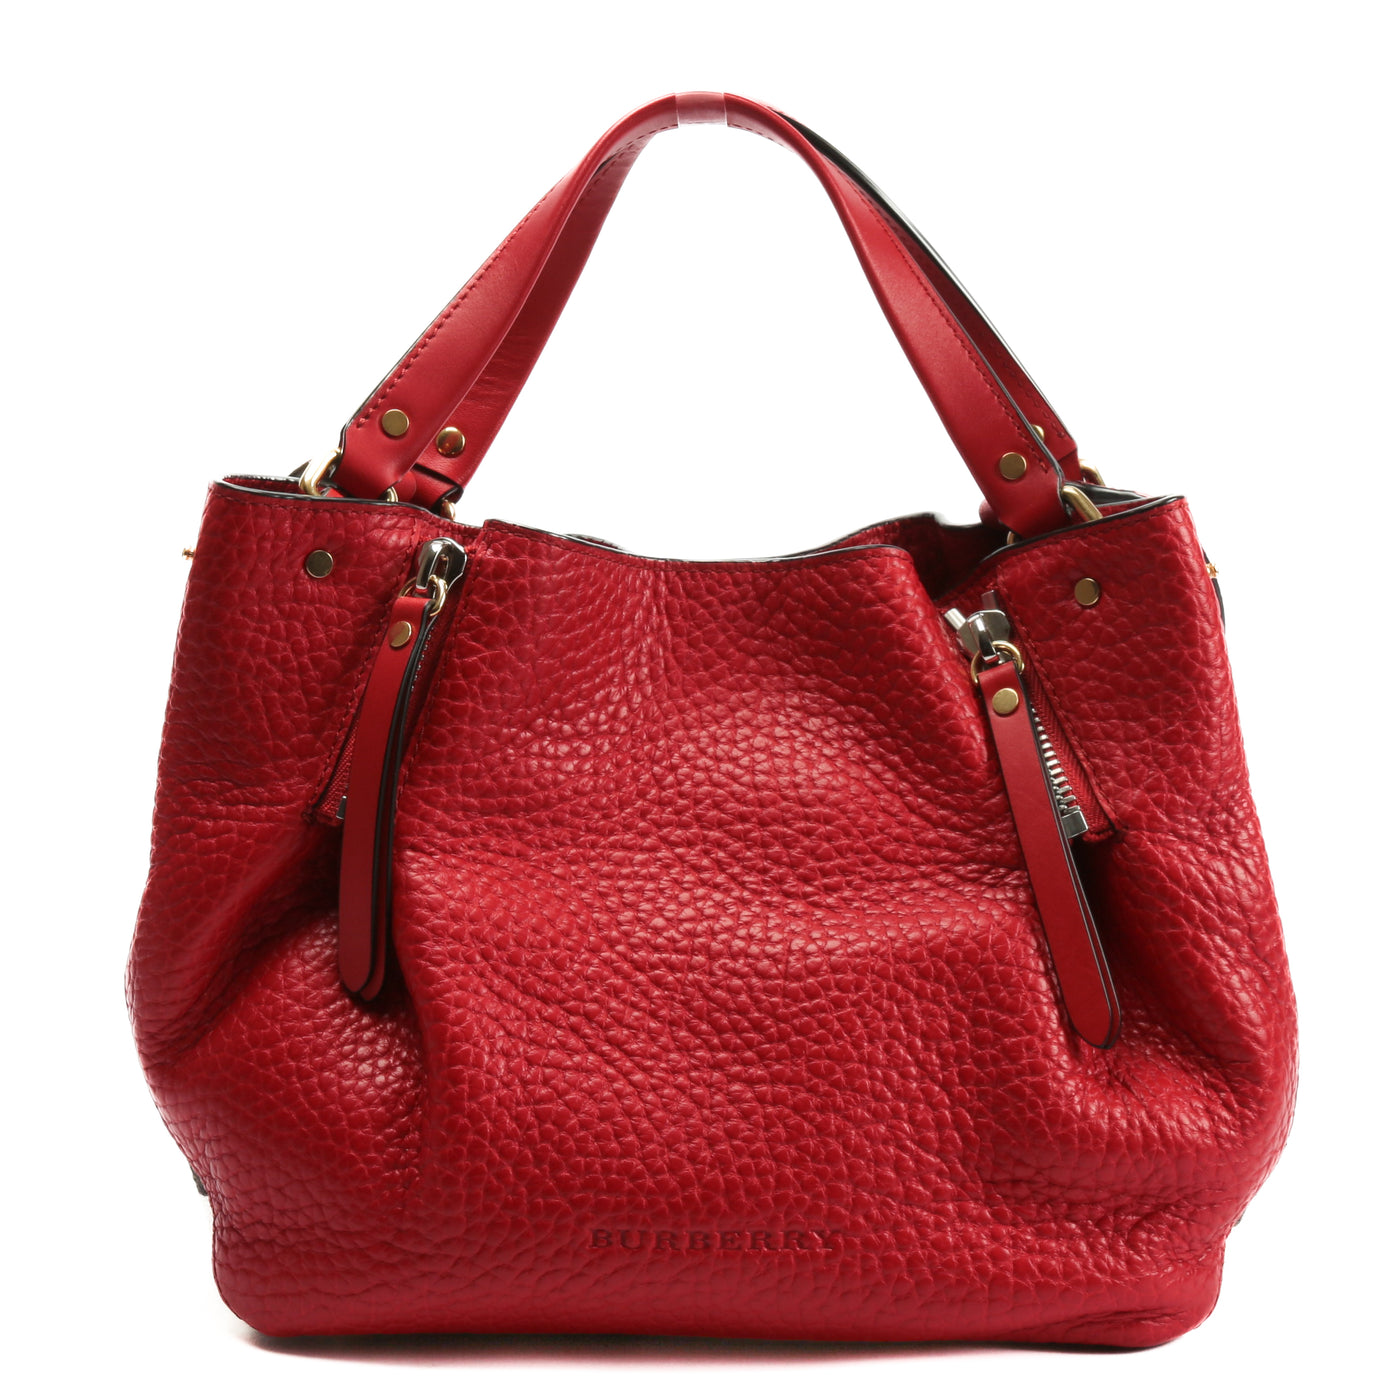 BURBERRY House Check Maidstone Tote - Brick Red